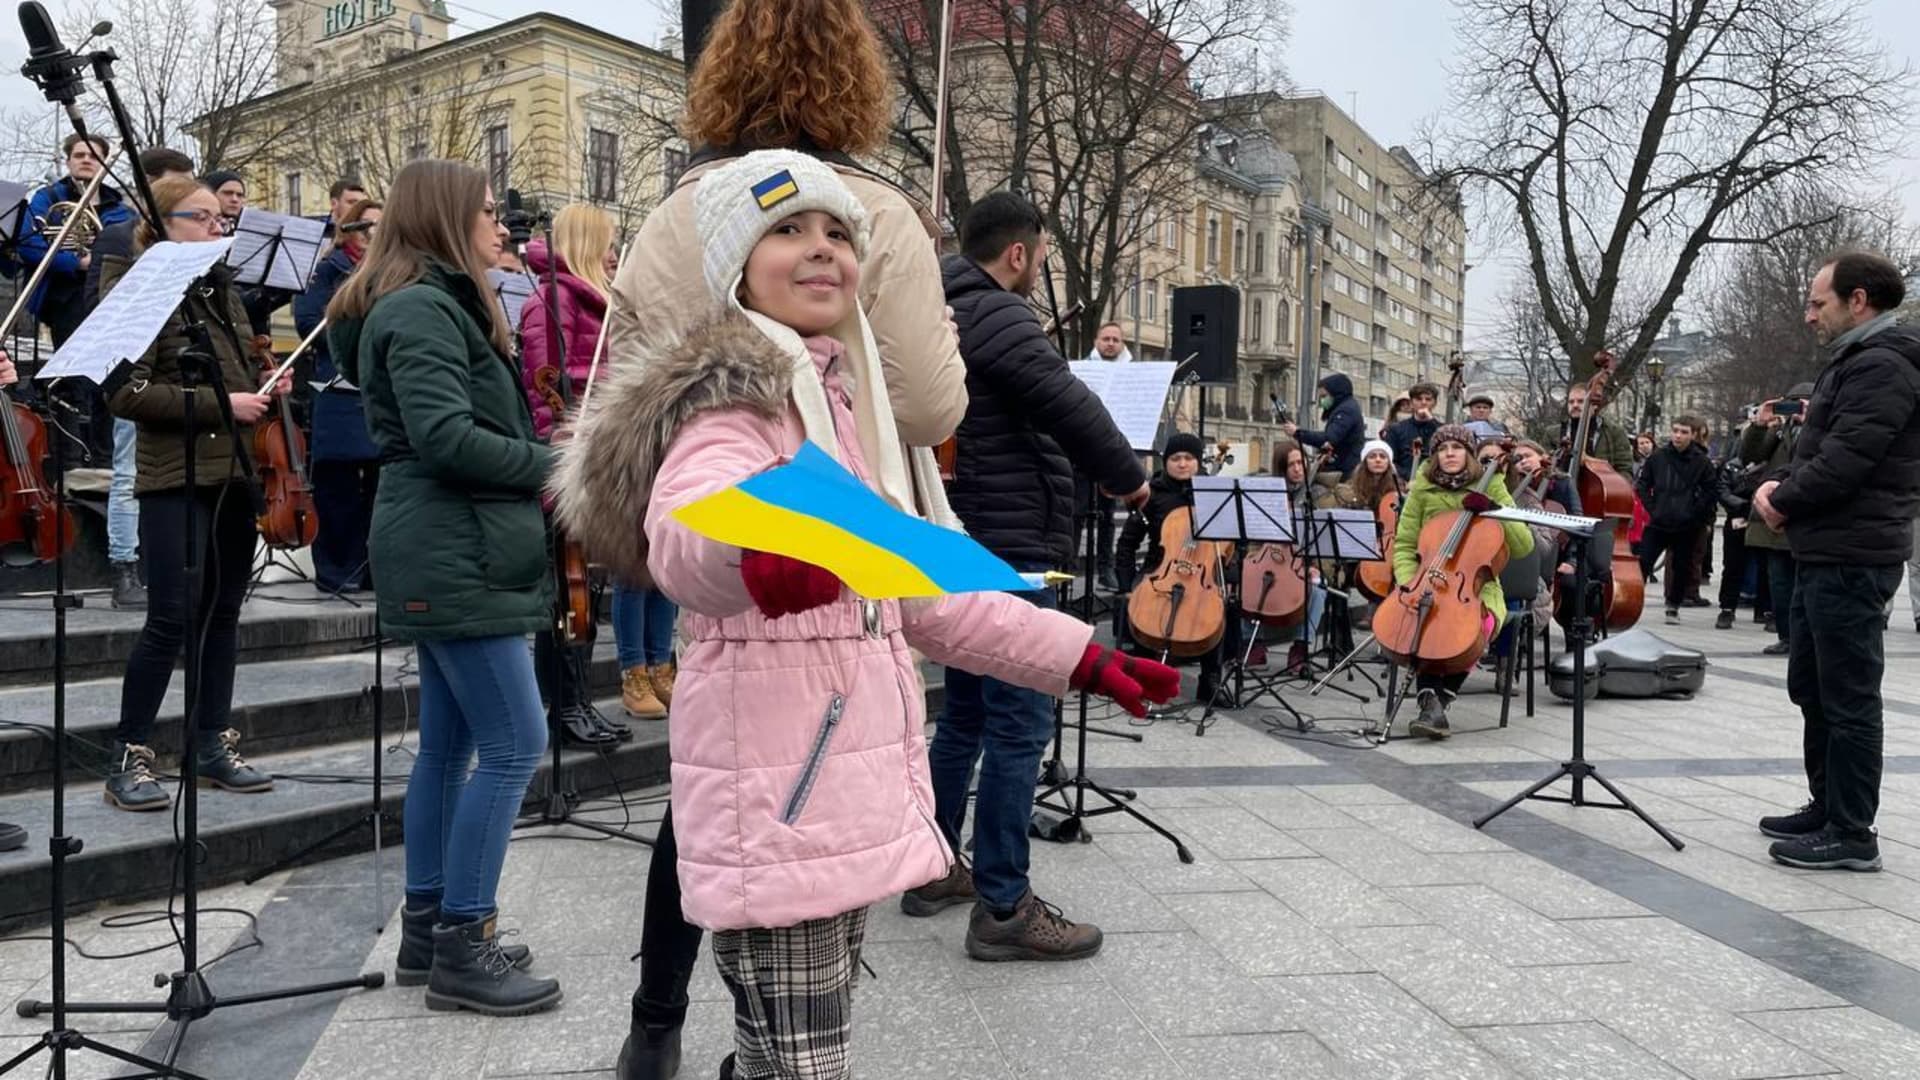 Russian attacks are protested with a concert on March 16, 2022 in Lviv, Ukraine. Concerts were held at Rynok Square and Svobody street by Lviv Symphony Orchestra and Mikola Lisenko Music Academy.